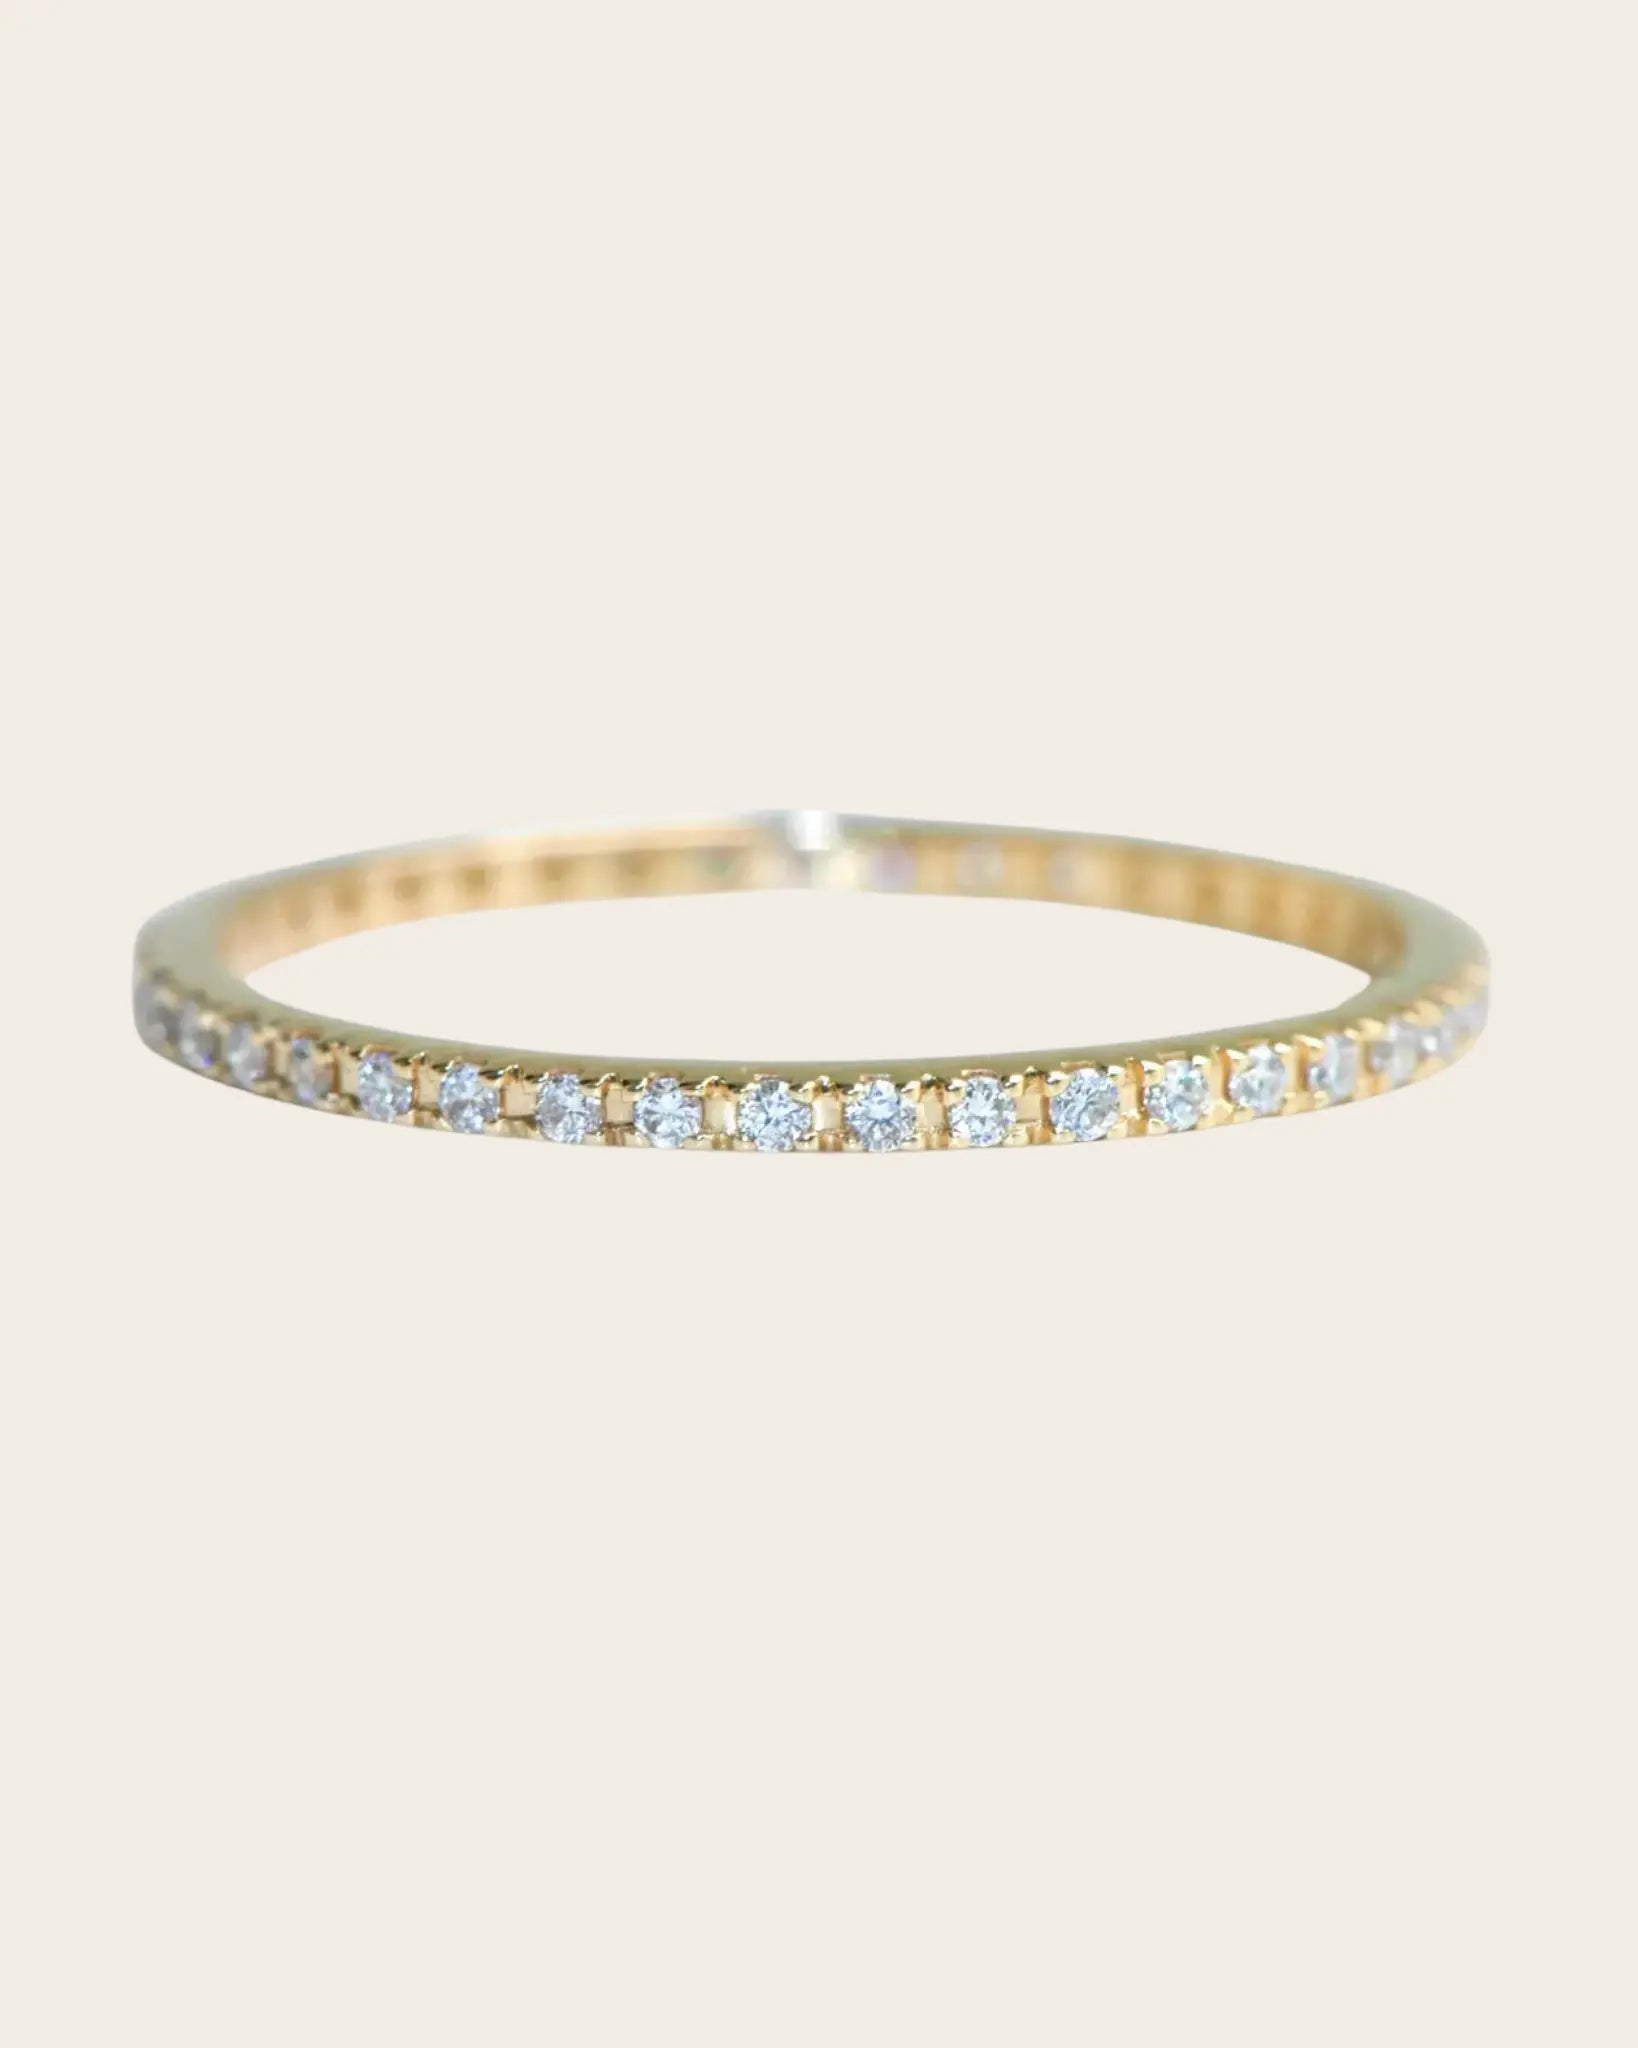 Yellow Gold with White Diamond Eternity Band Yellow Gold with White Diamond Eternity Band Squash Blossom Original Squash Blossom Original  Squash Blossom Vail